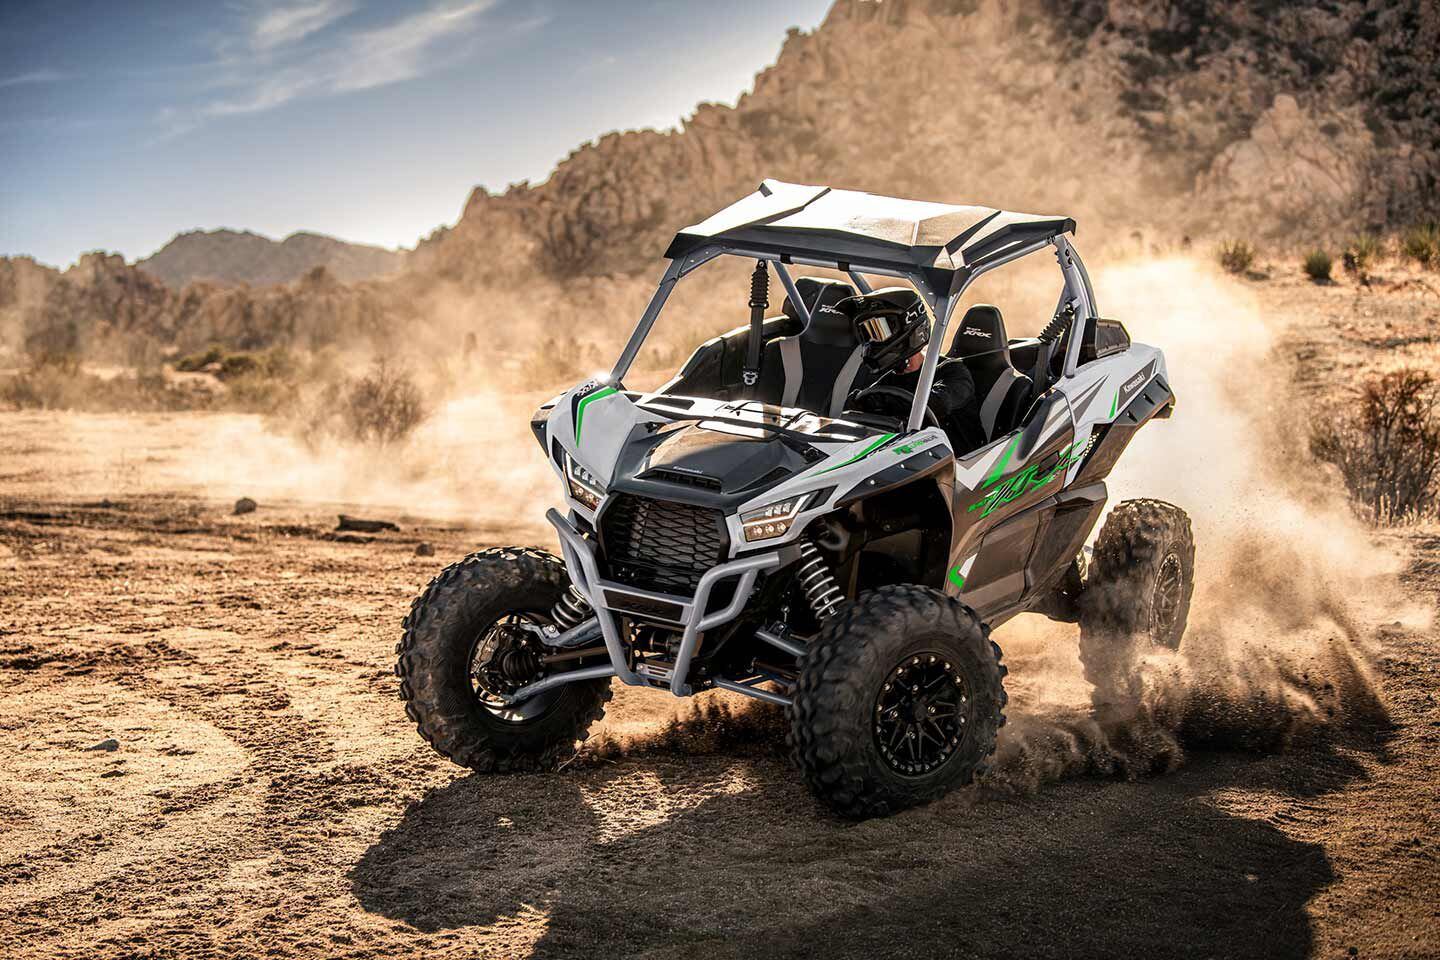 With up to 21 inches of suspension travel, the KRX will feel right at home on any trail.